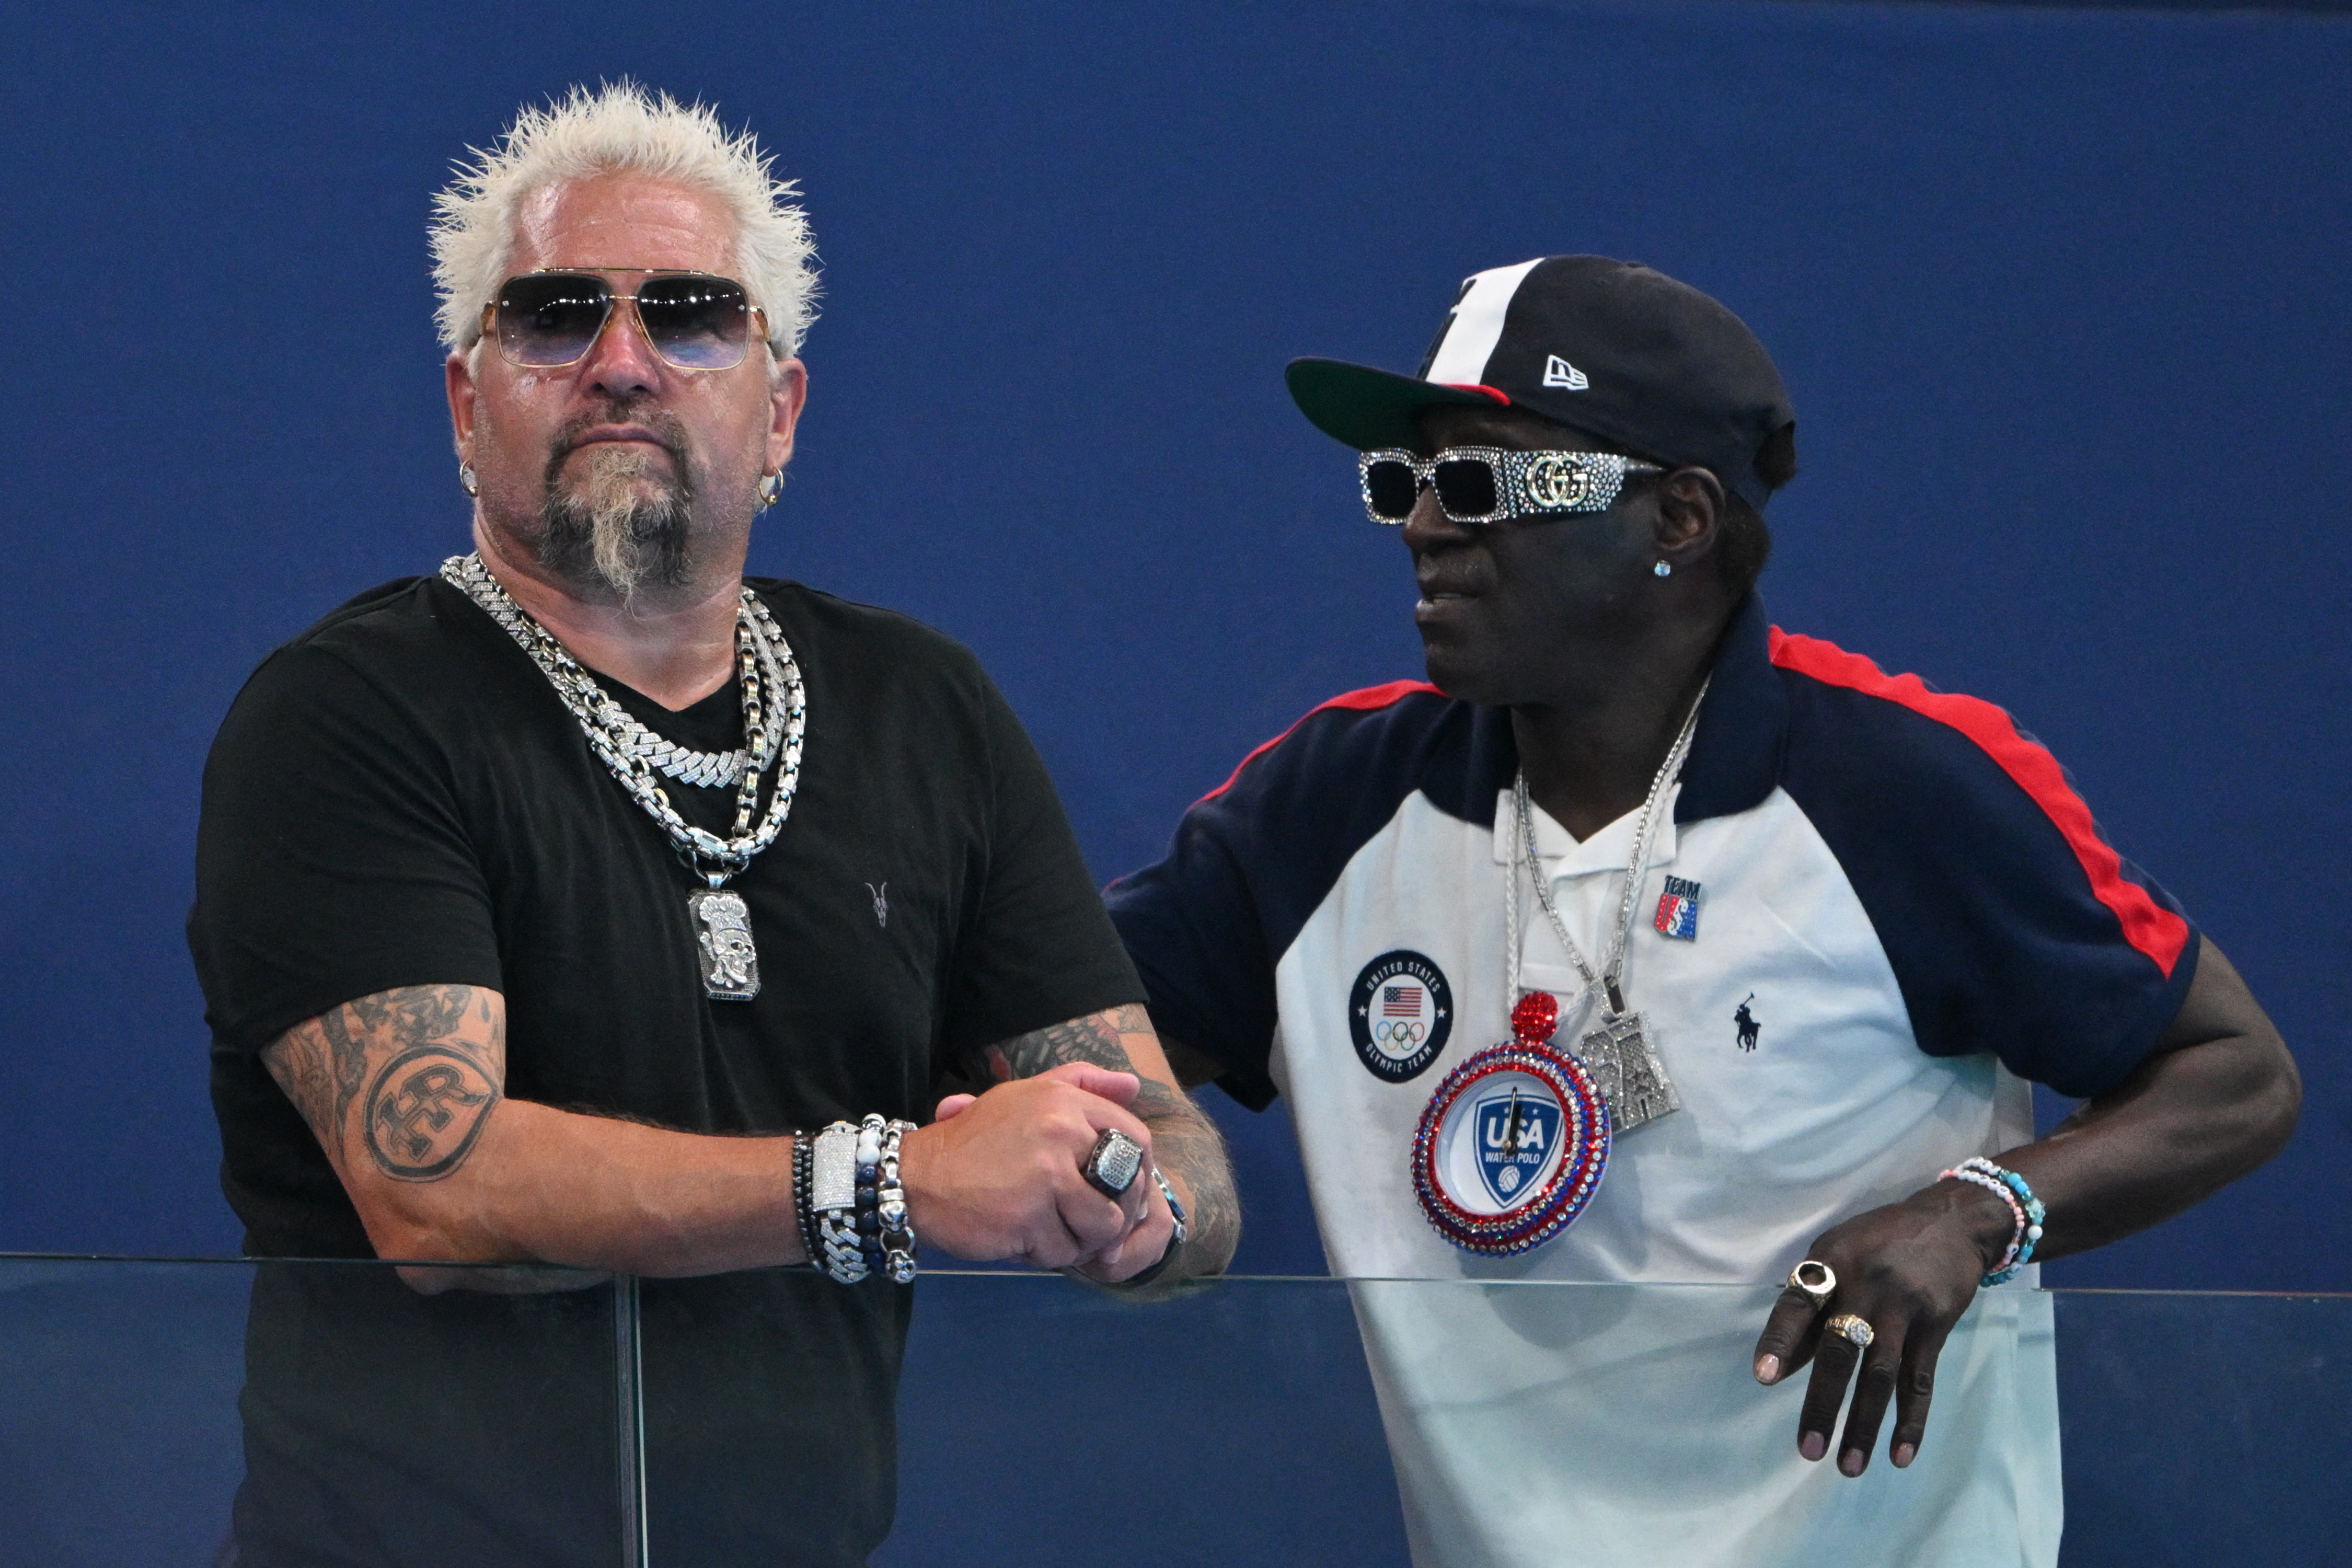 Guy Fieri flaunted his thinner frame in a form-fitting black T-shirt